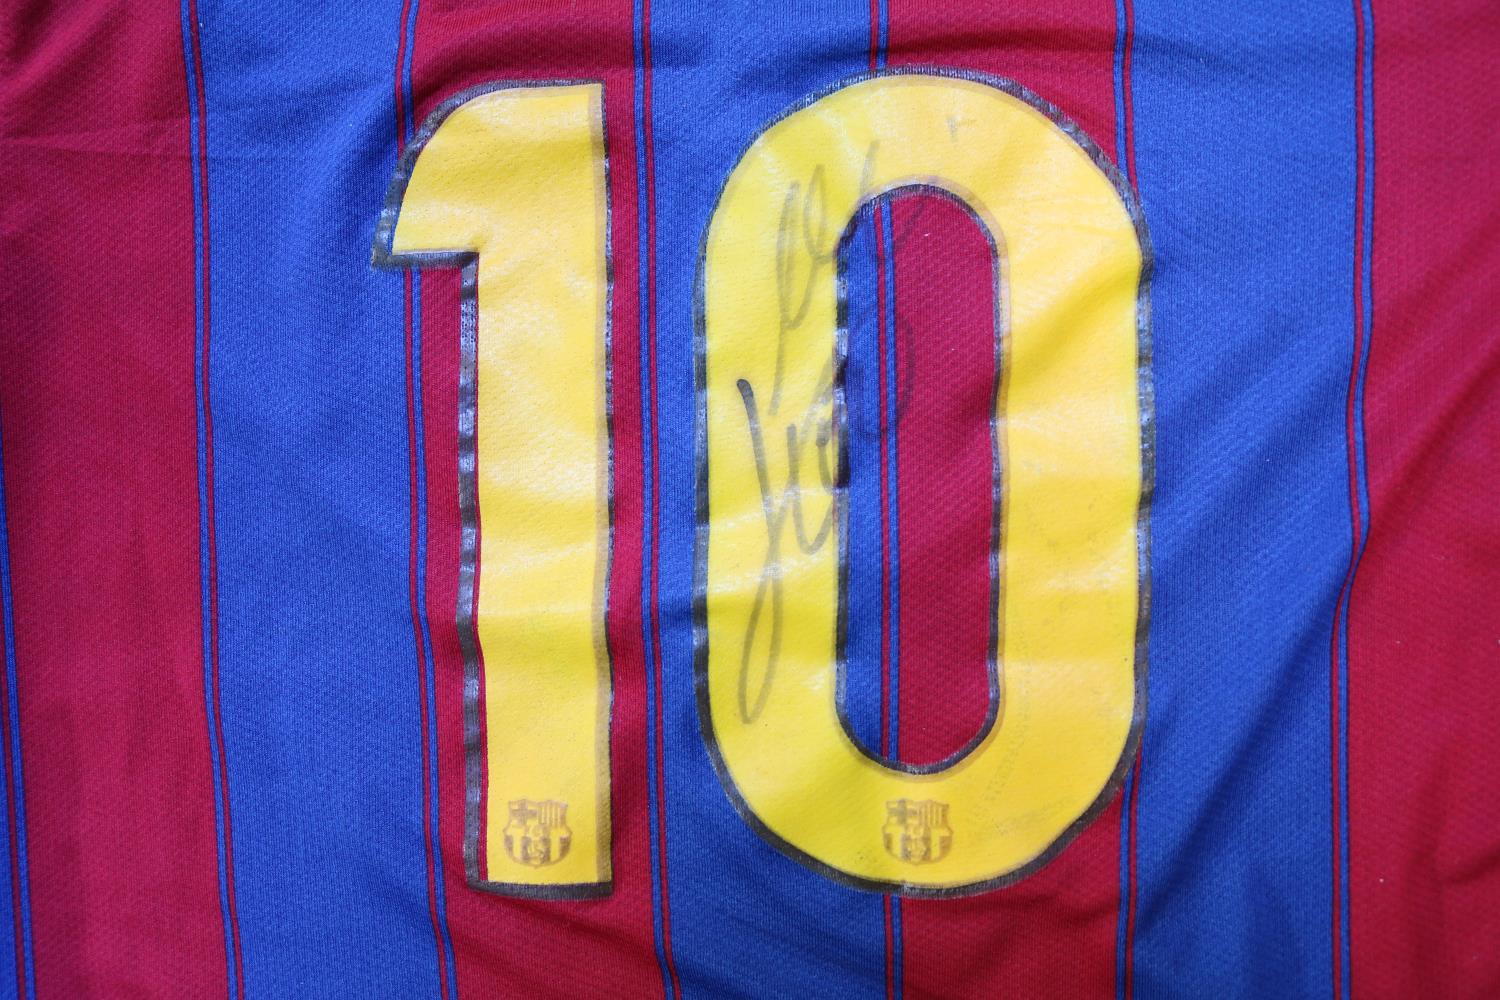 LIONEL MESSI 2009/2010 SIGNED BARCELONA #10 JERSEY The jersey is accompanied by a letter of - Image 8 of 10